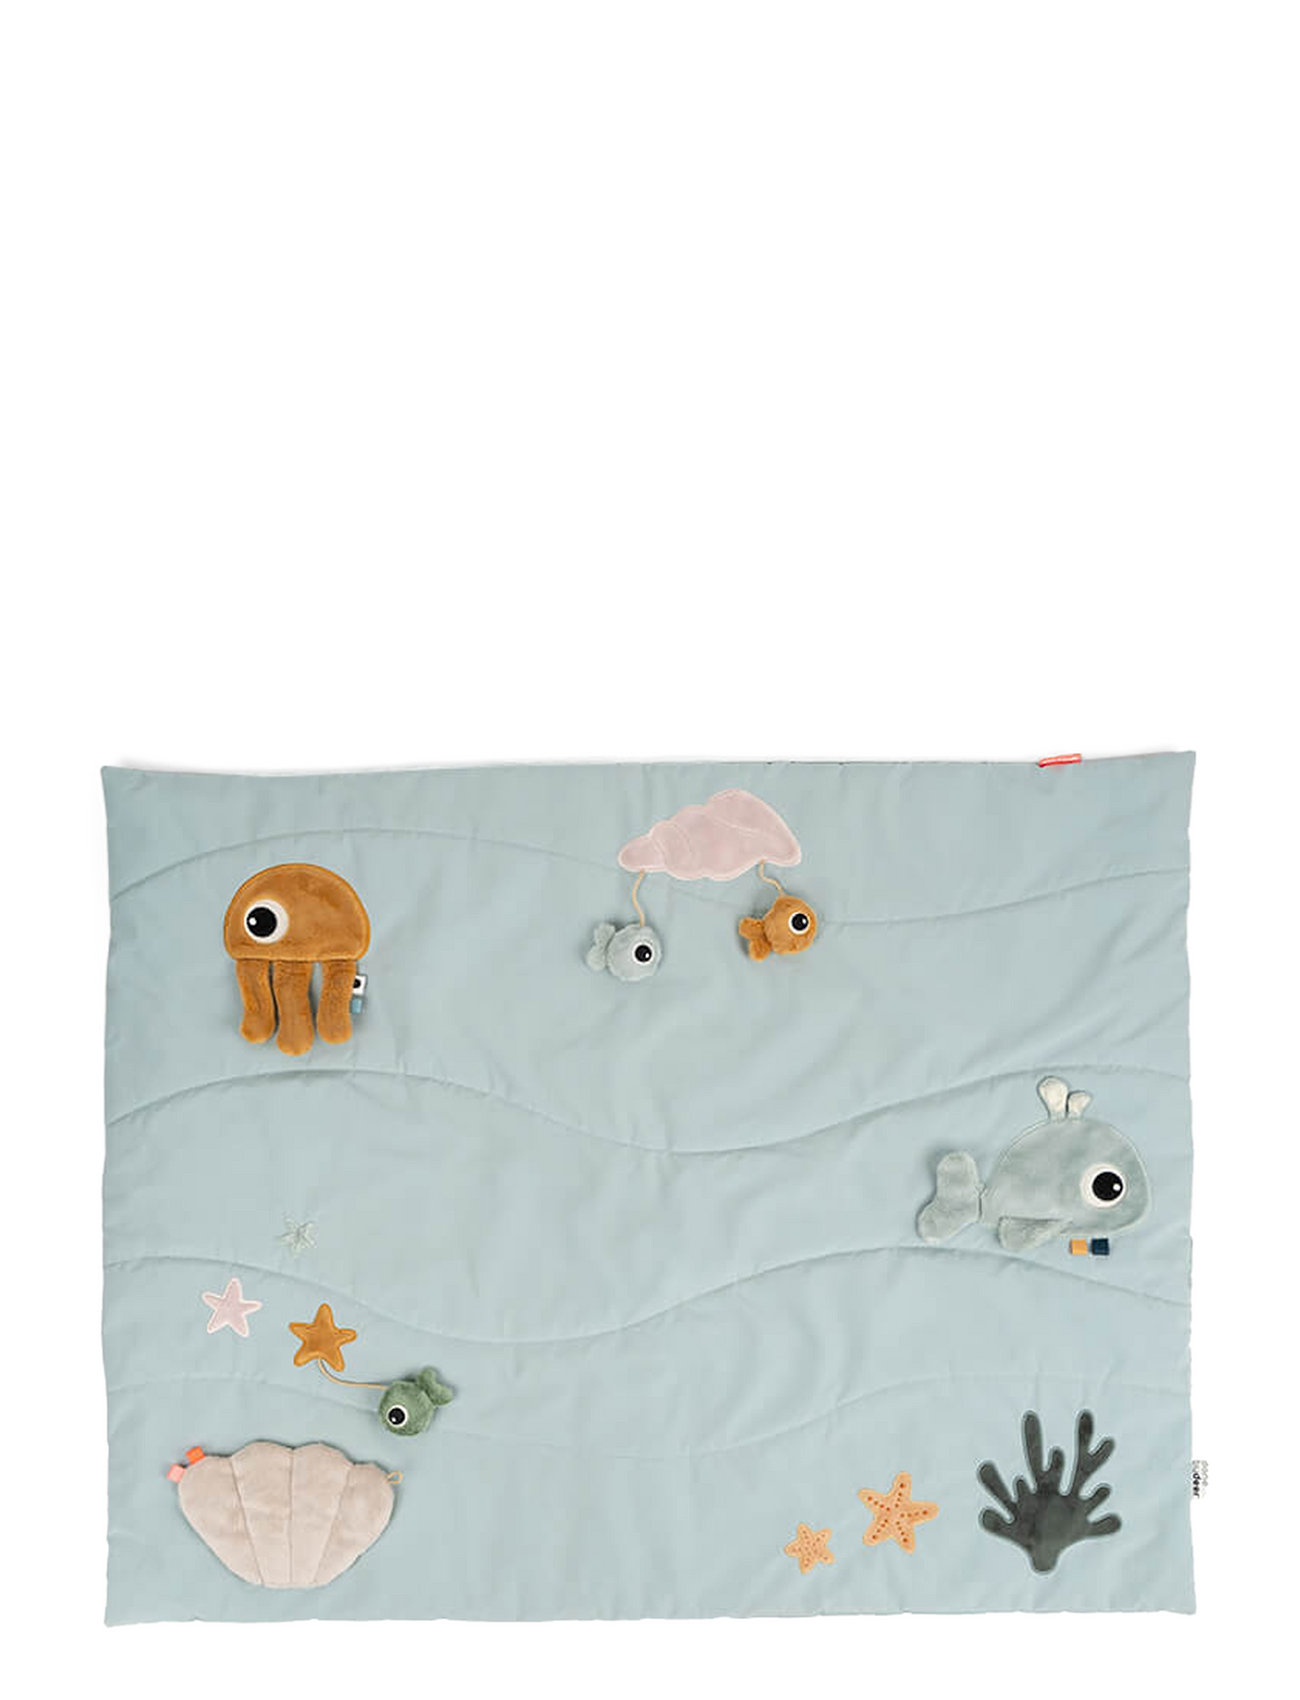 Sensory Play Mat Sea Friends Baby & Maternity Baby Sleep Play Mats Multi/patterned D By Deer